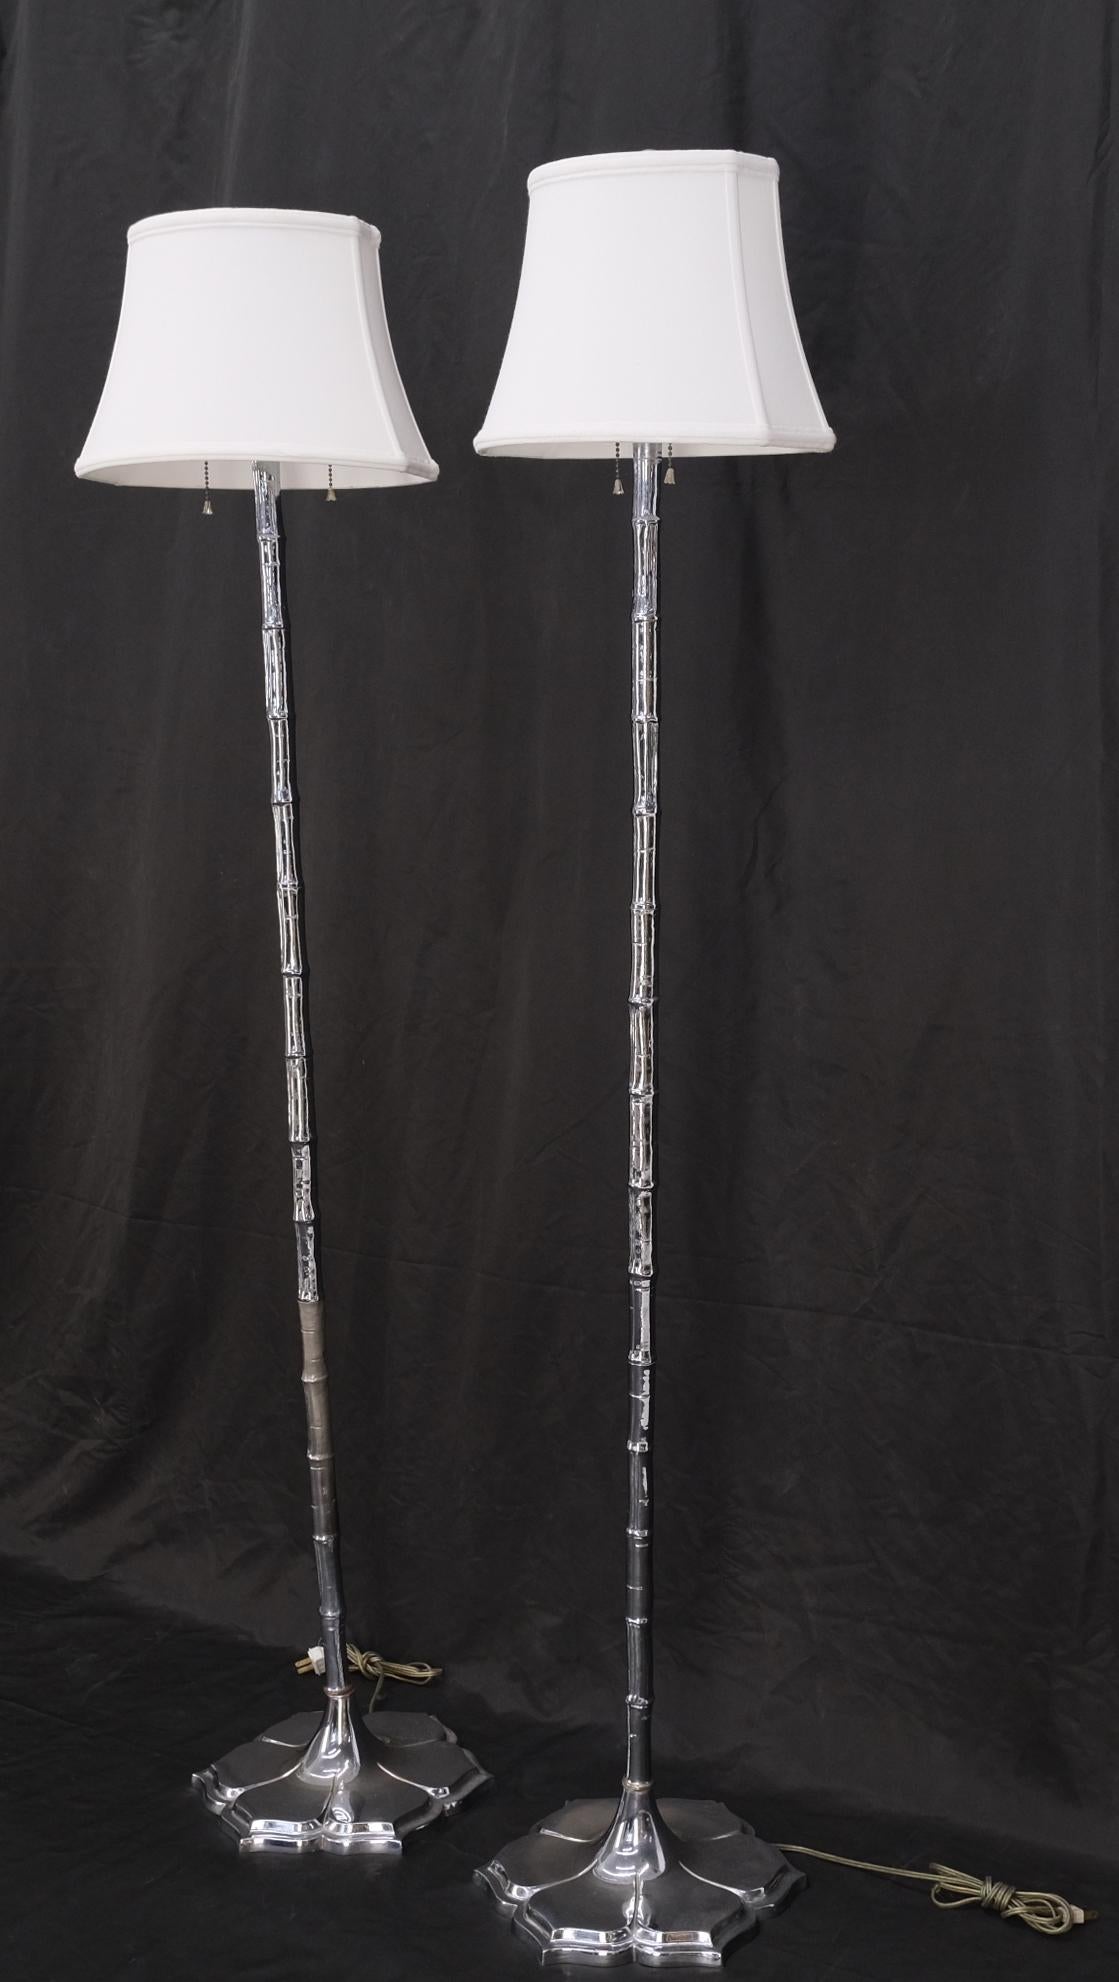 Pair of Cast Lotus Shape Bases Chrome Faux Bamboo Mid-Century Modern Floor Lamps For Sale 5